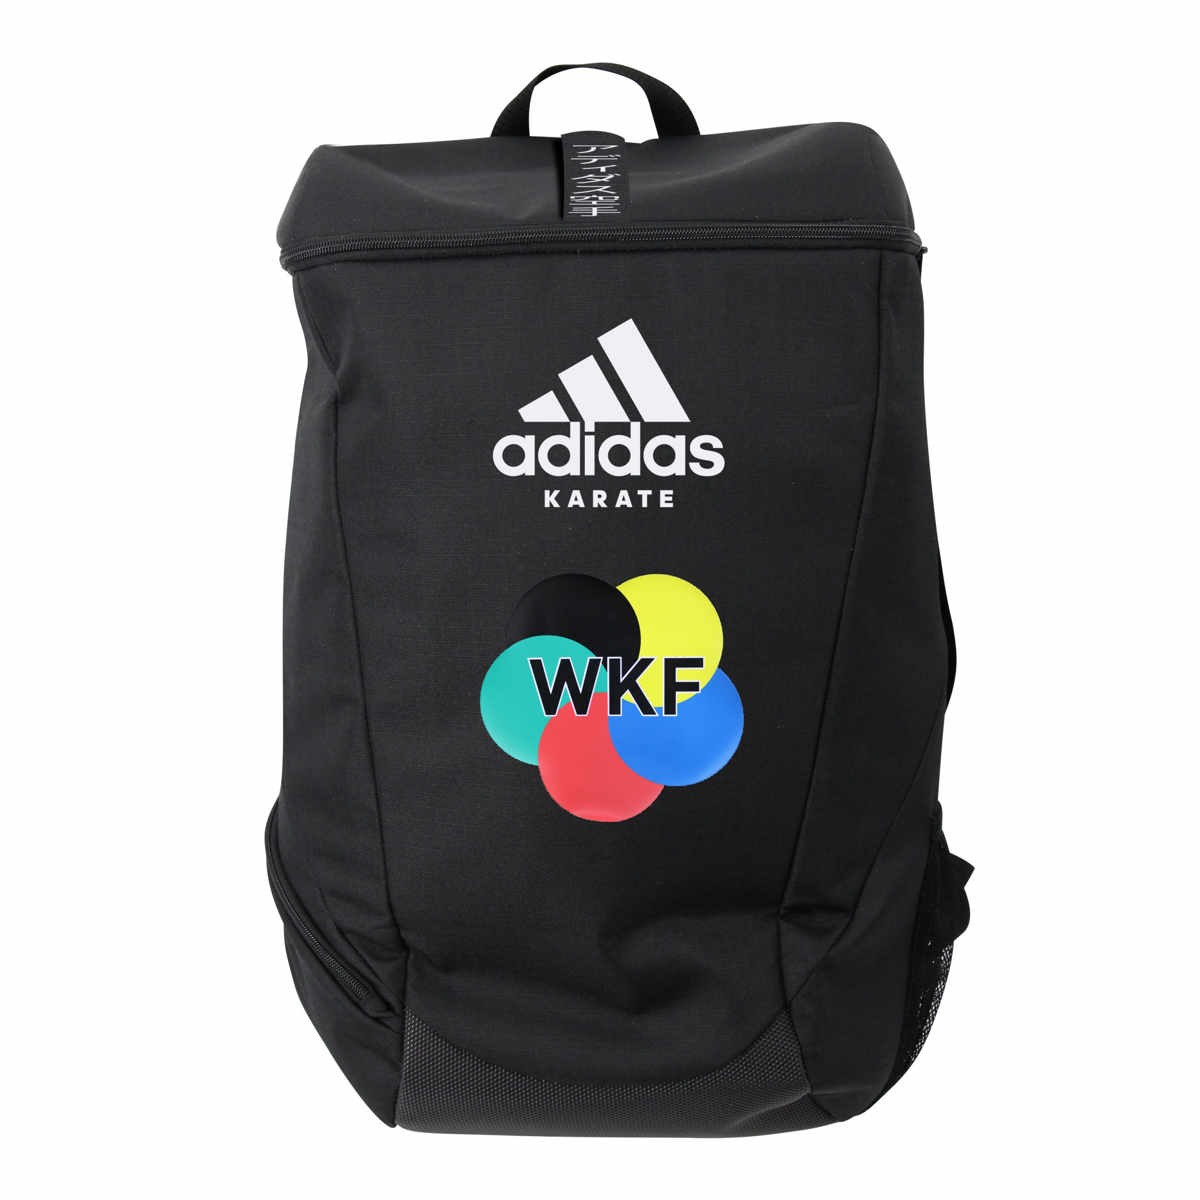 Adidas Sport BackPack with WKF logo